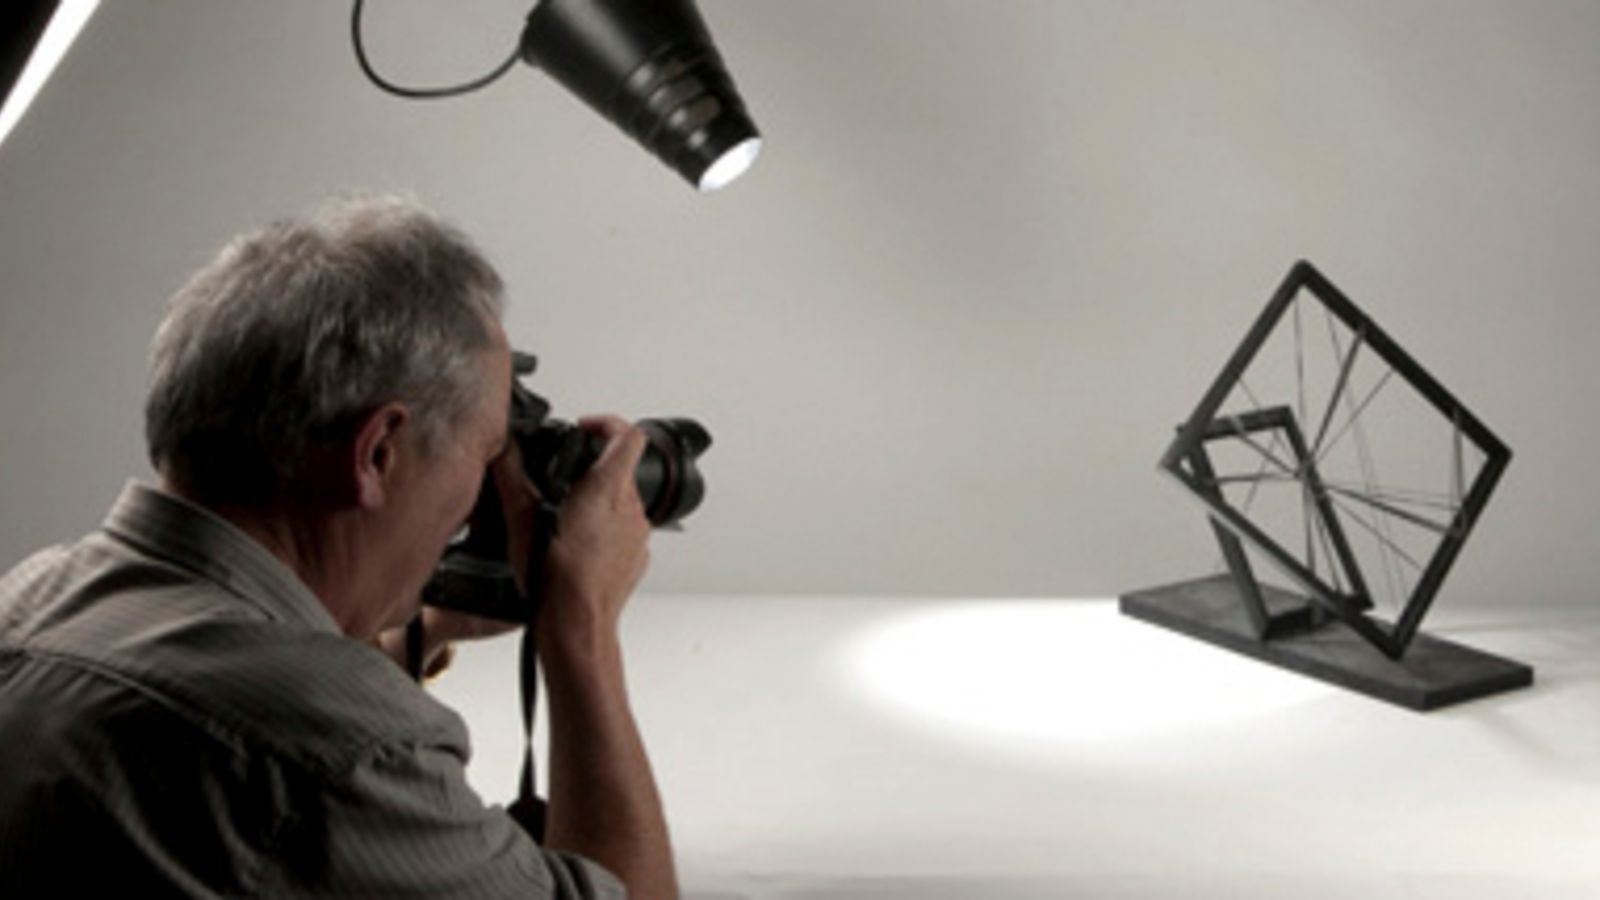 A grey-haired man photographs an abstract frame shape in a light grey studio with a single spotlight.